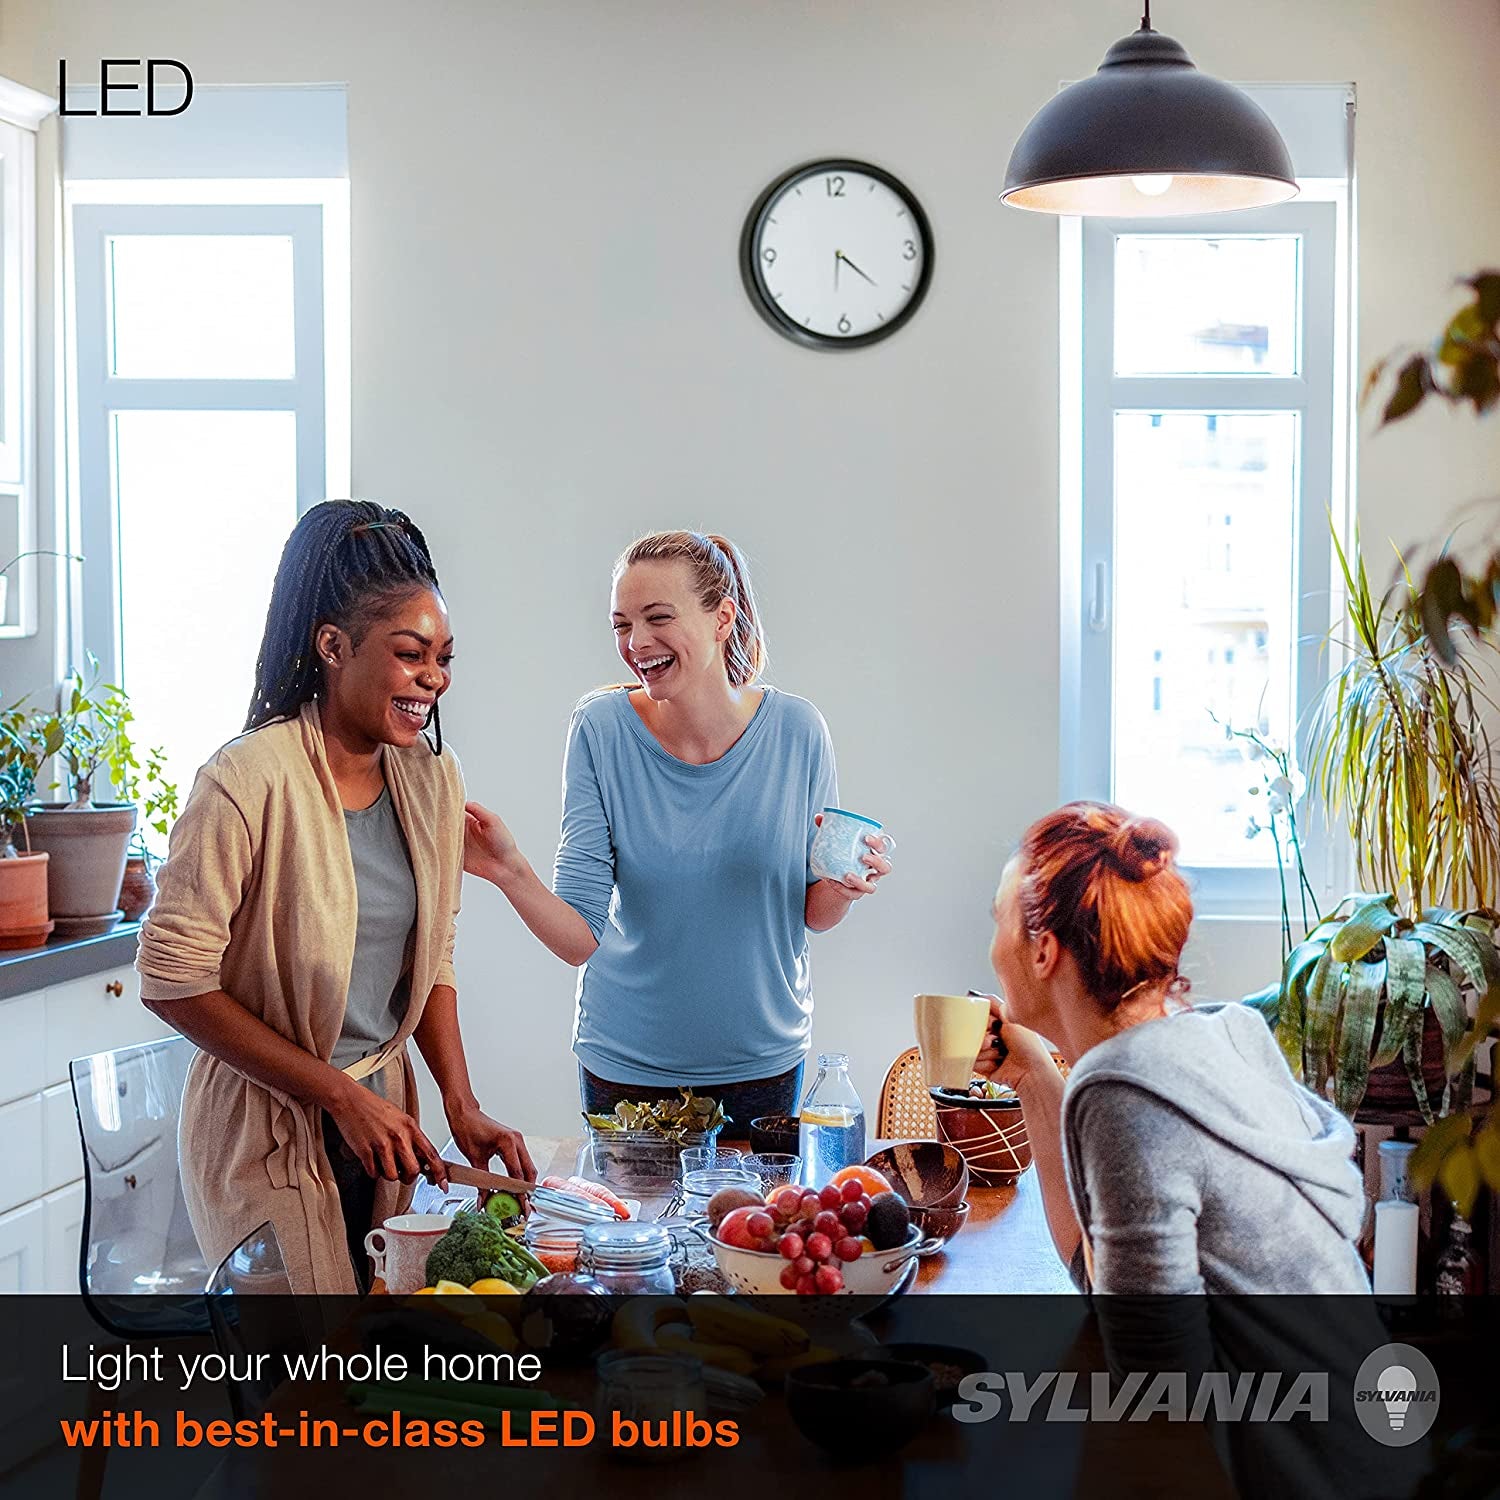 SYLVANIA LED A19 Light Bulb, 100W Equivalent, Efficient 14W, 1500 Lumens, Frosted Finish, Daylight - 4 Pack (78103)